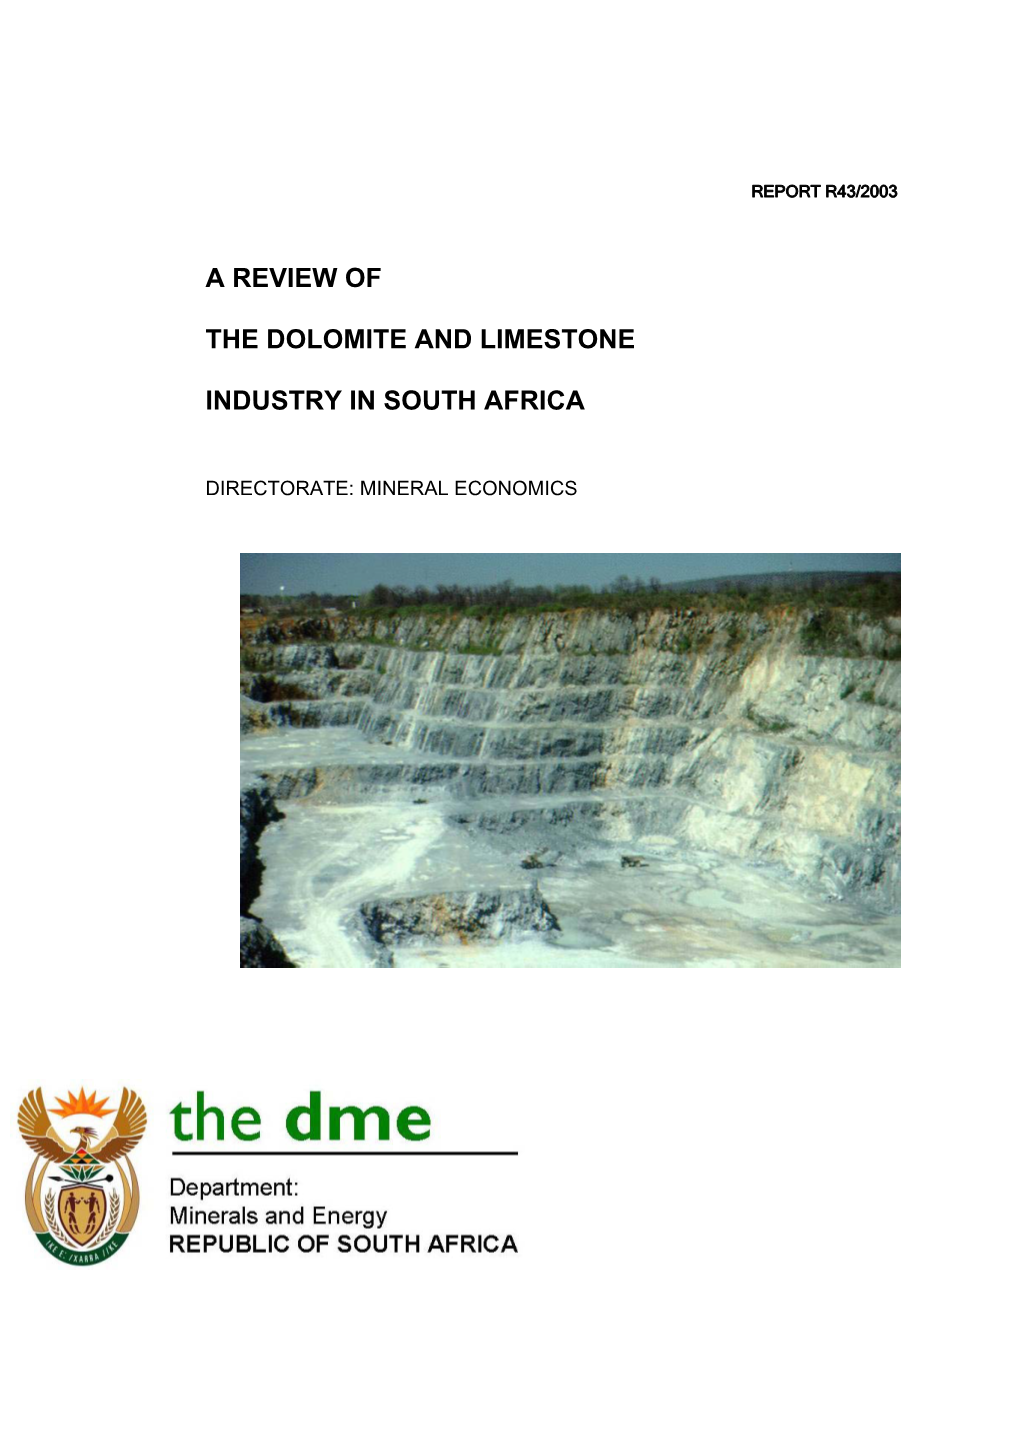 A Review of the Dolomite and Limestone Industry in South